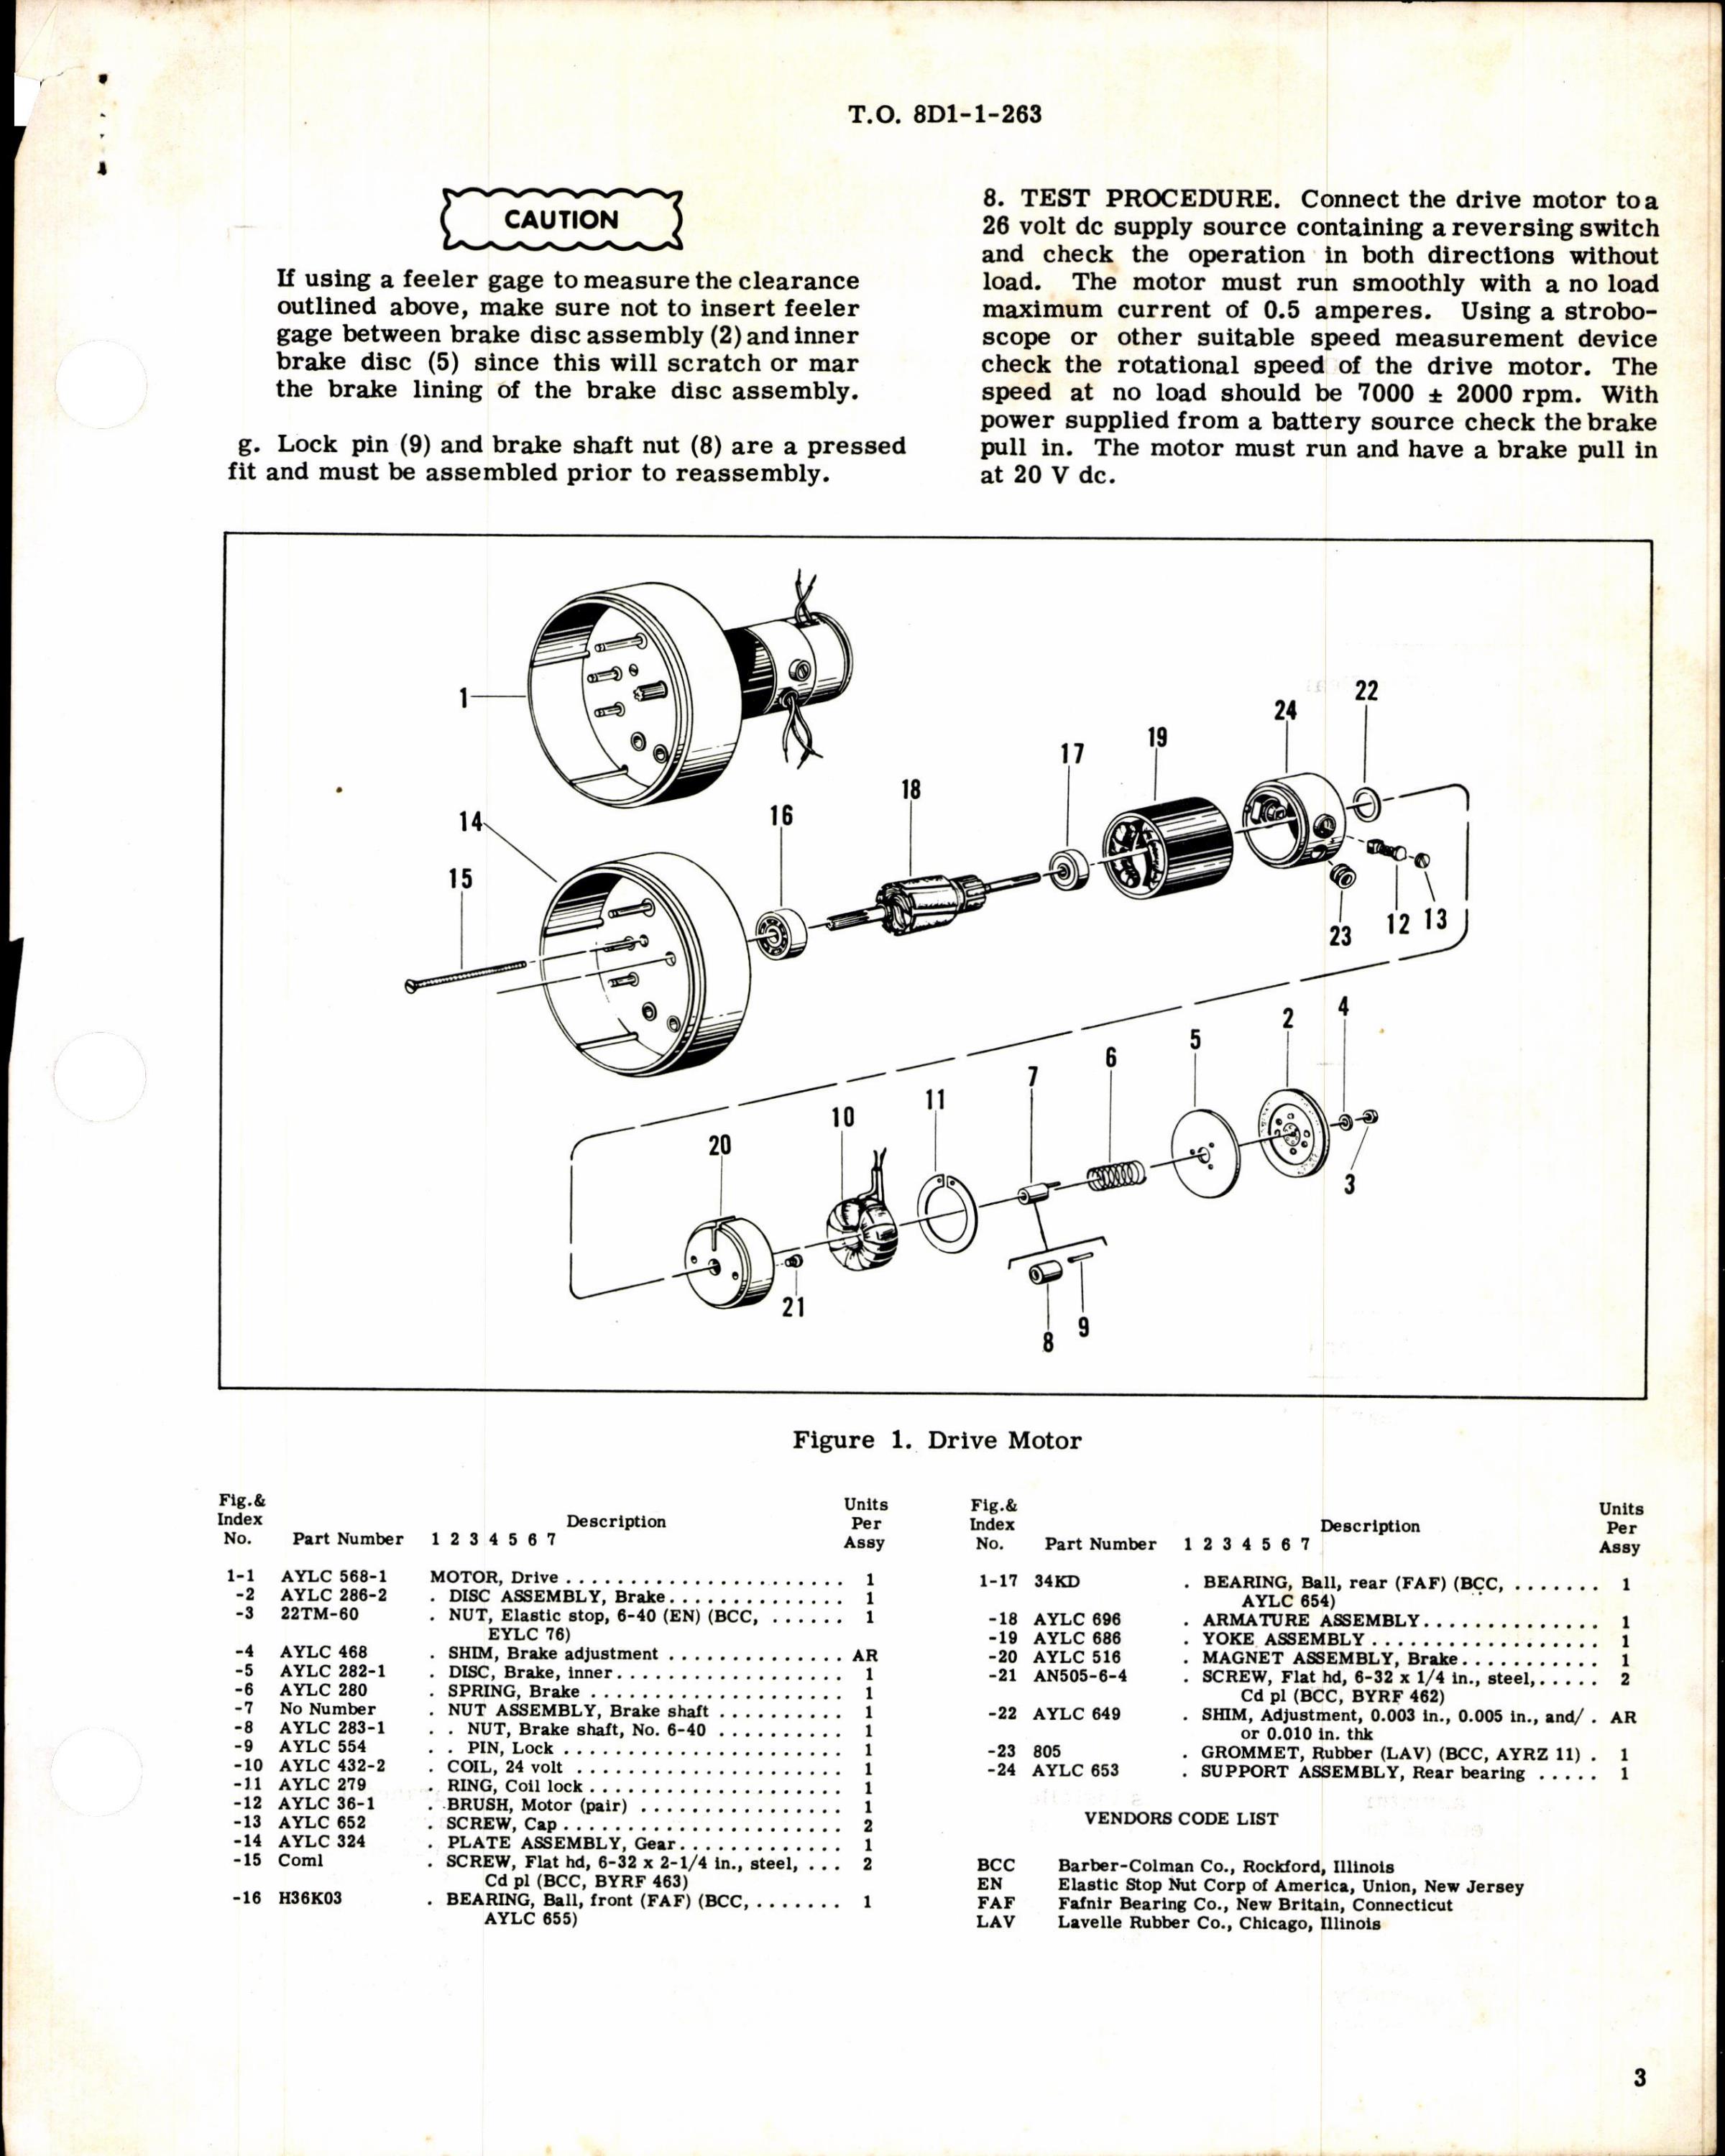 Sample page 3 from AirCorps Library document: Overhaul Instructions with Parts Breakdown for Drive Motor AYLC 568-1